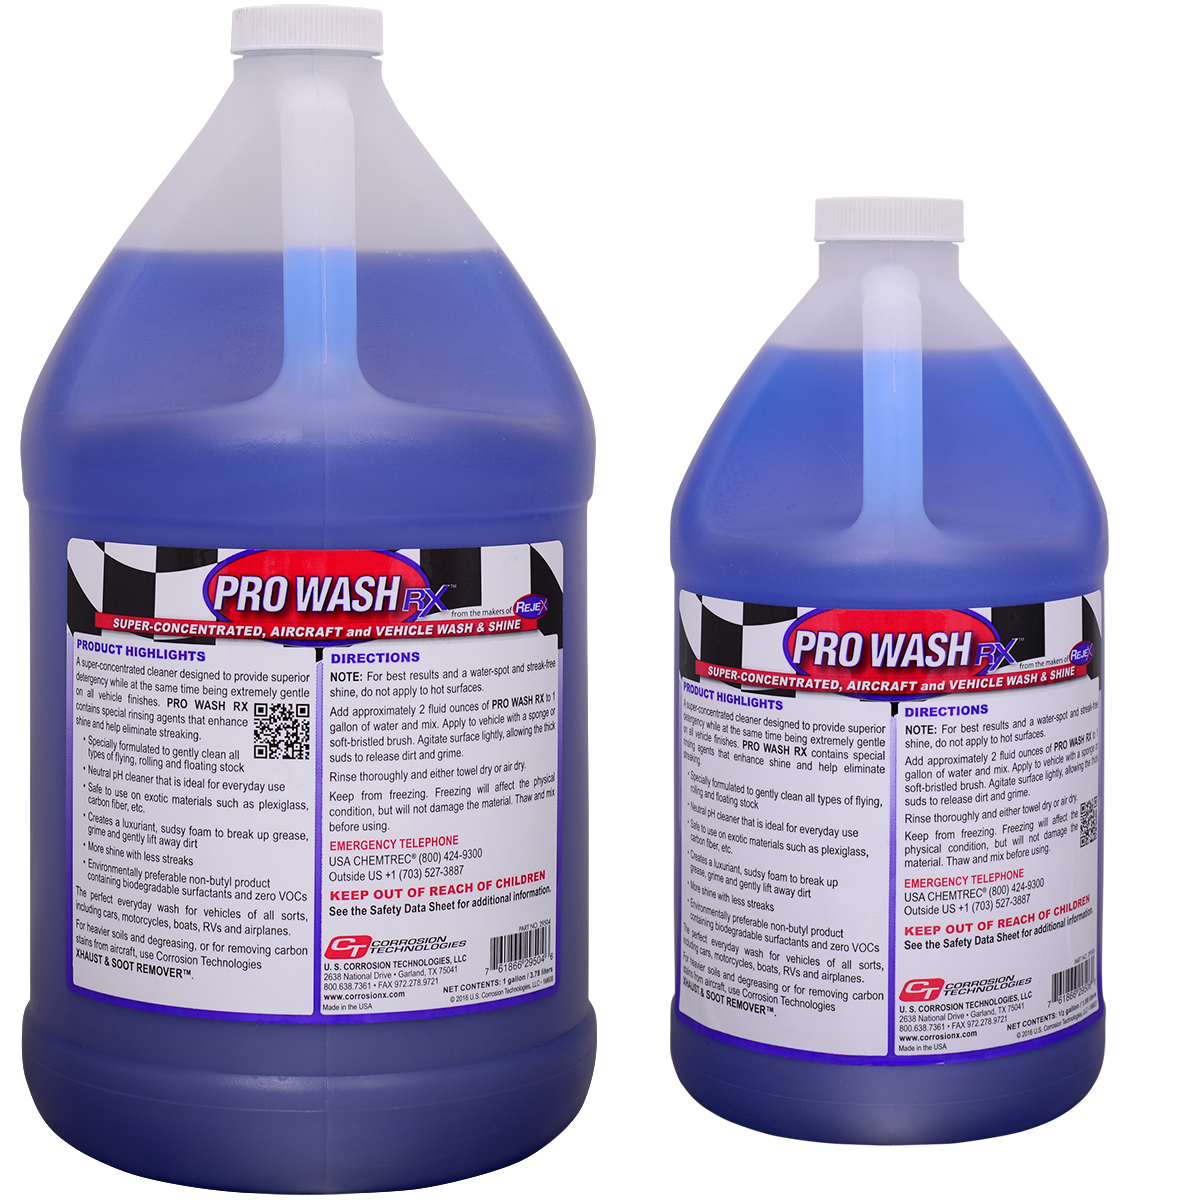 Super Clean Foaming Cleaner and Degreaser!! Dissolve grease on contact and  quickly remove dirt!!! 